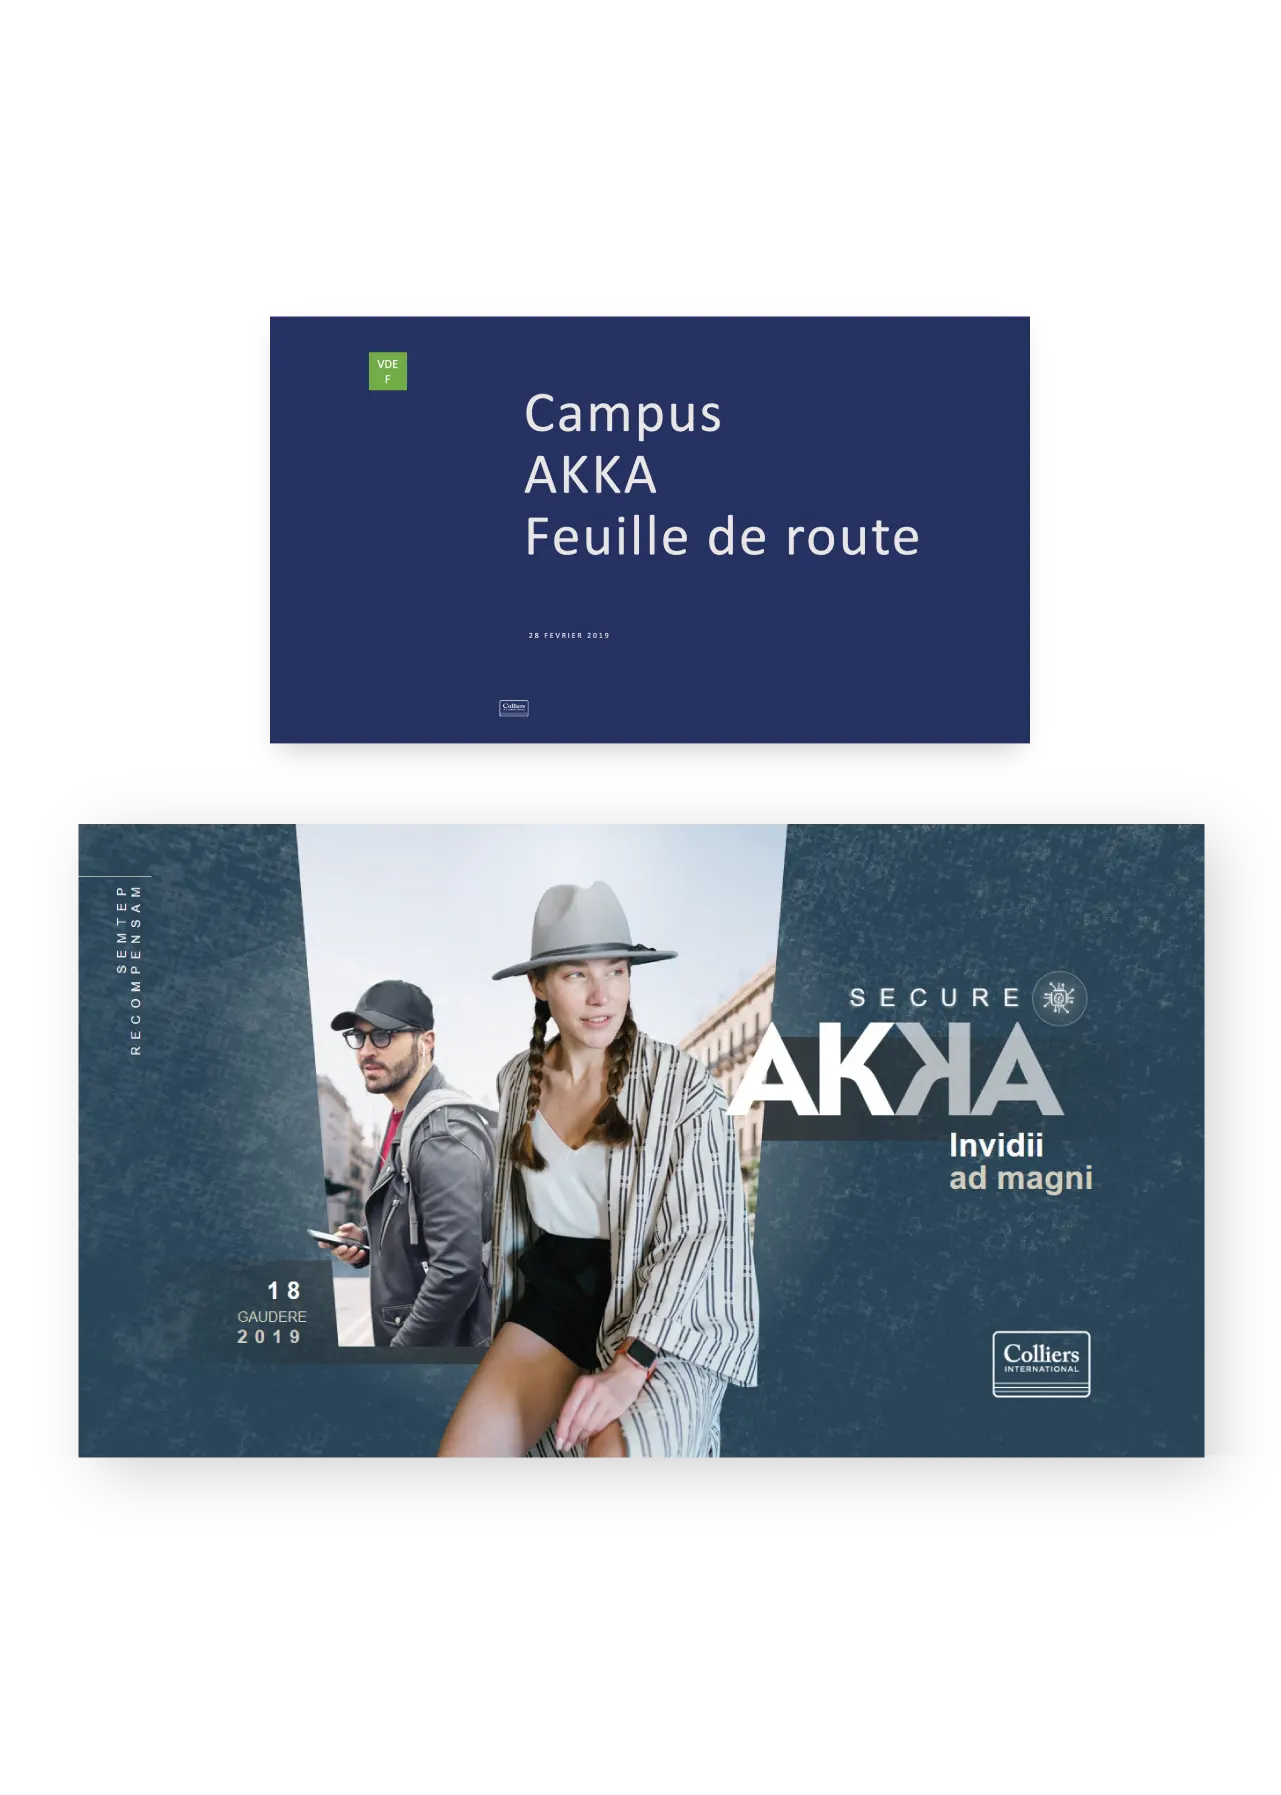 Before-after-mobile-AKKA-01